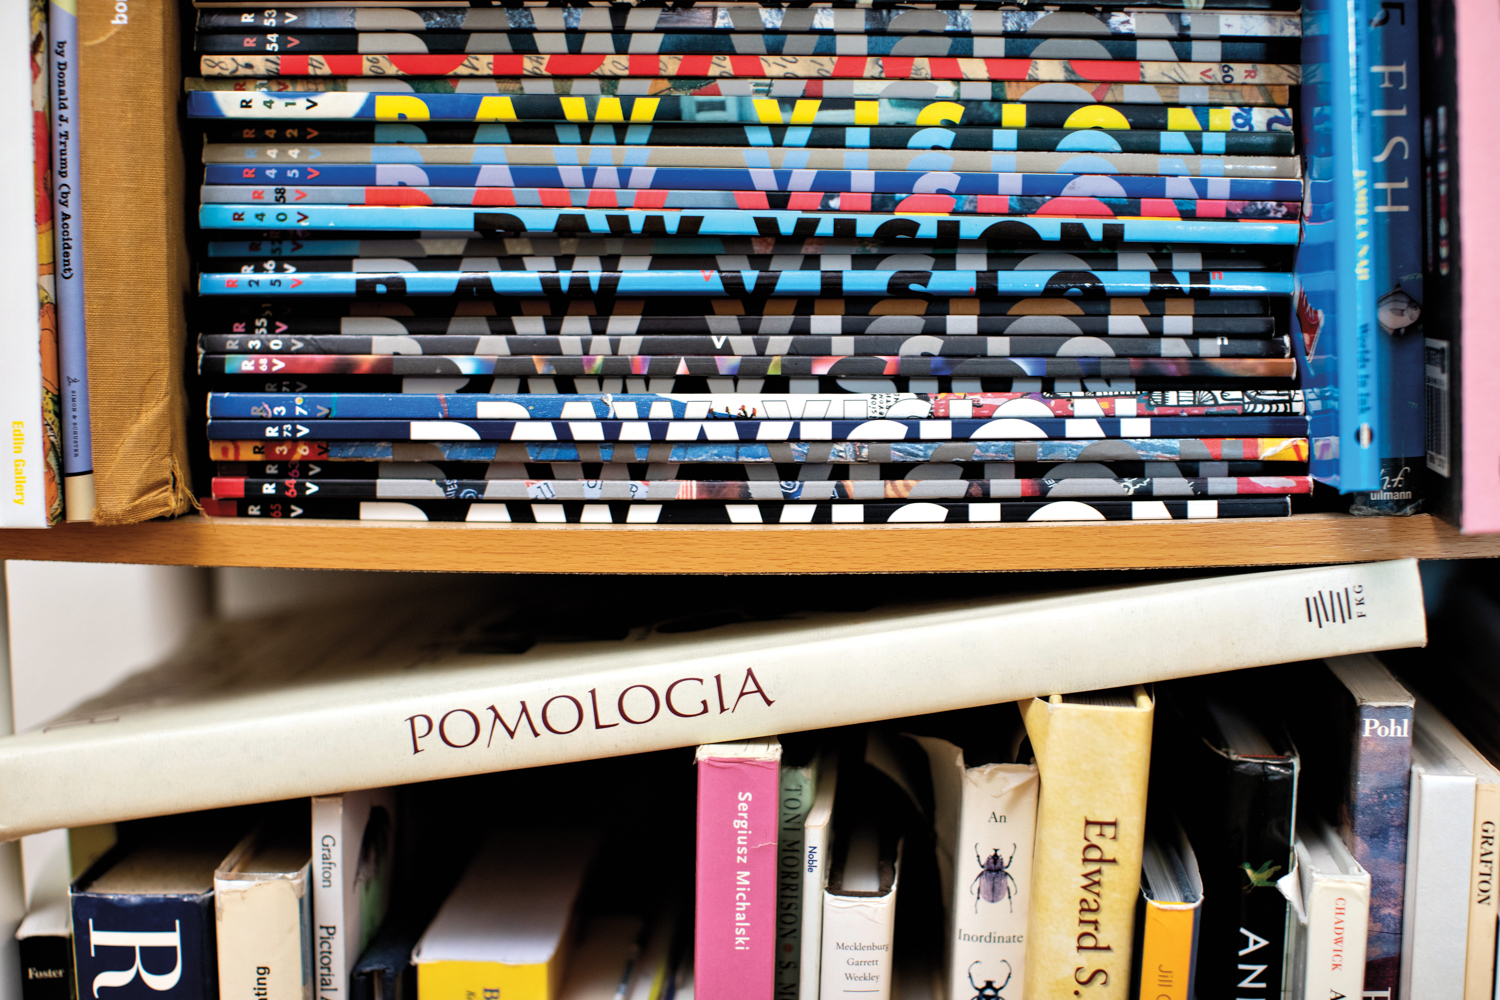 A book shelf piled with magazines on the top shelf and books on the bottom shelf.